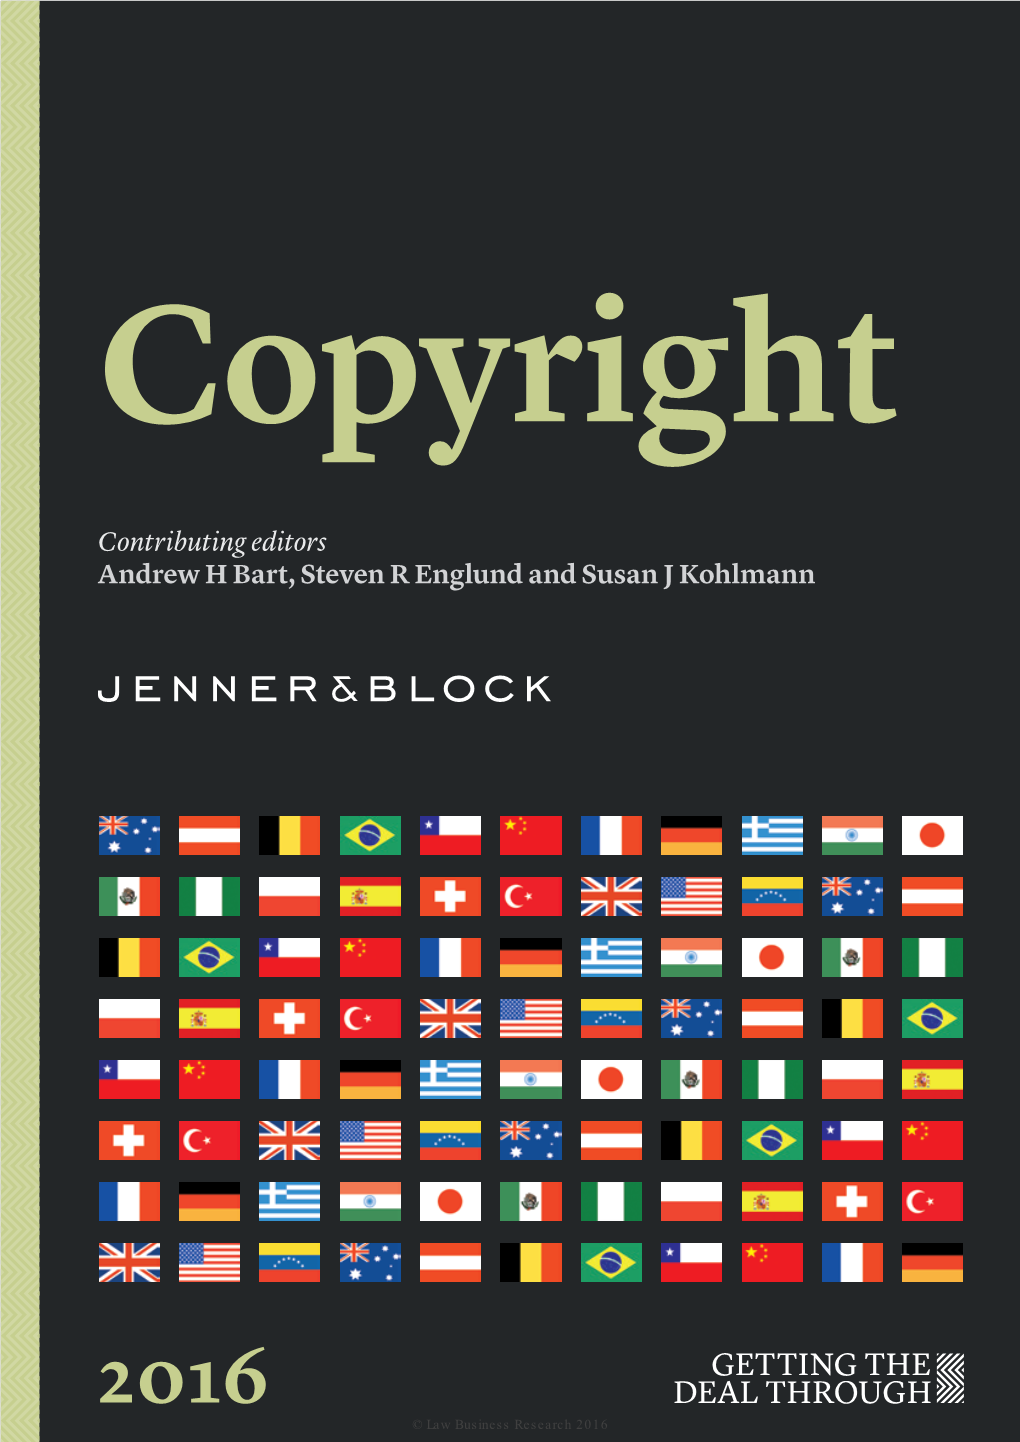 Copyright 2016, Getting the Deal Through